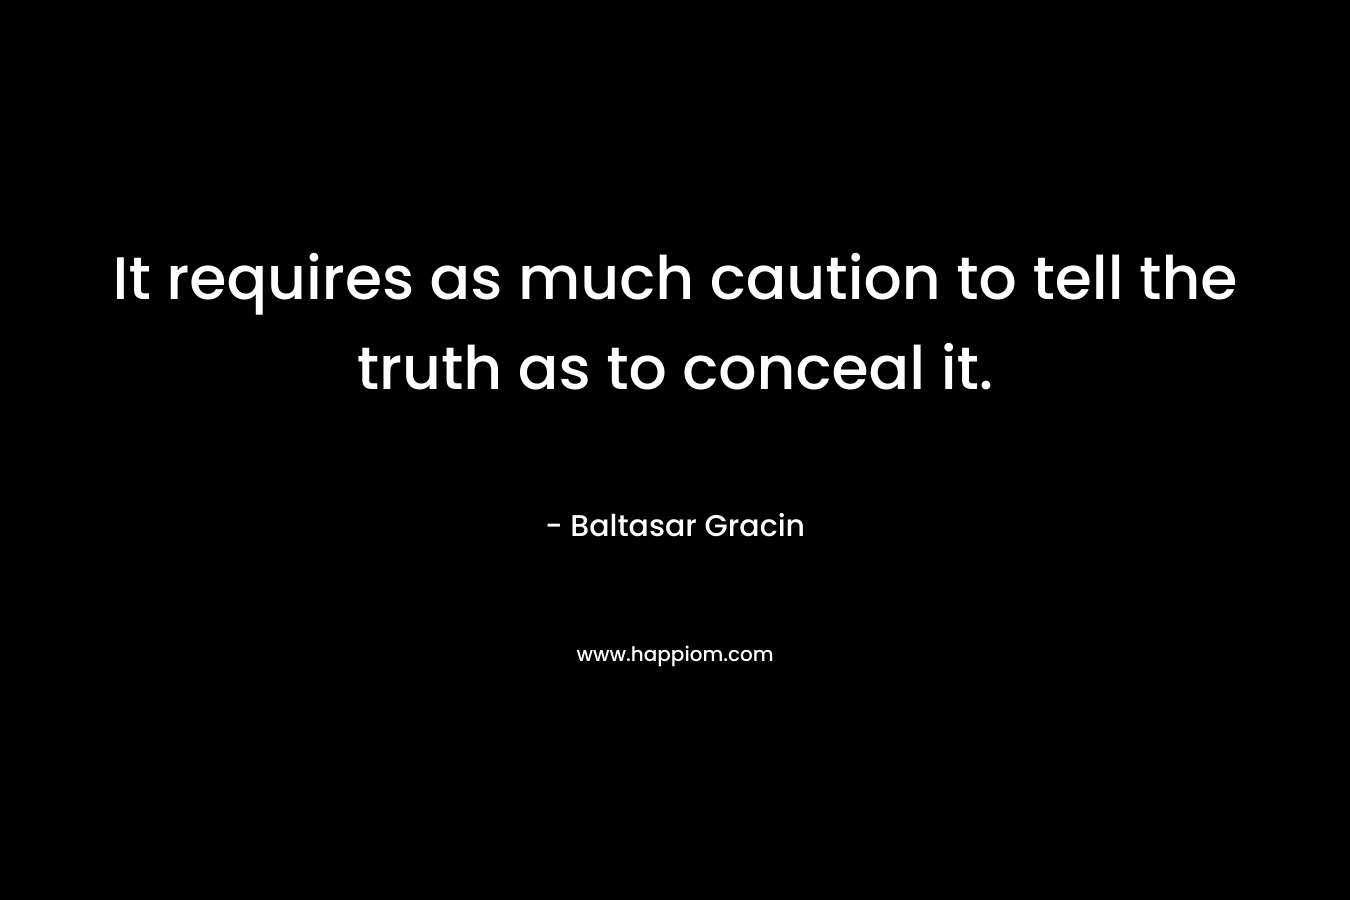 It requires as much caution to tell the truth as to conceal it. – Baltasar Gracin